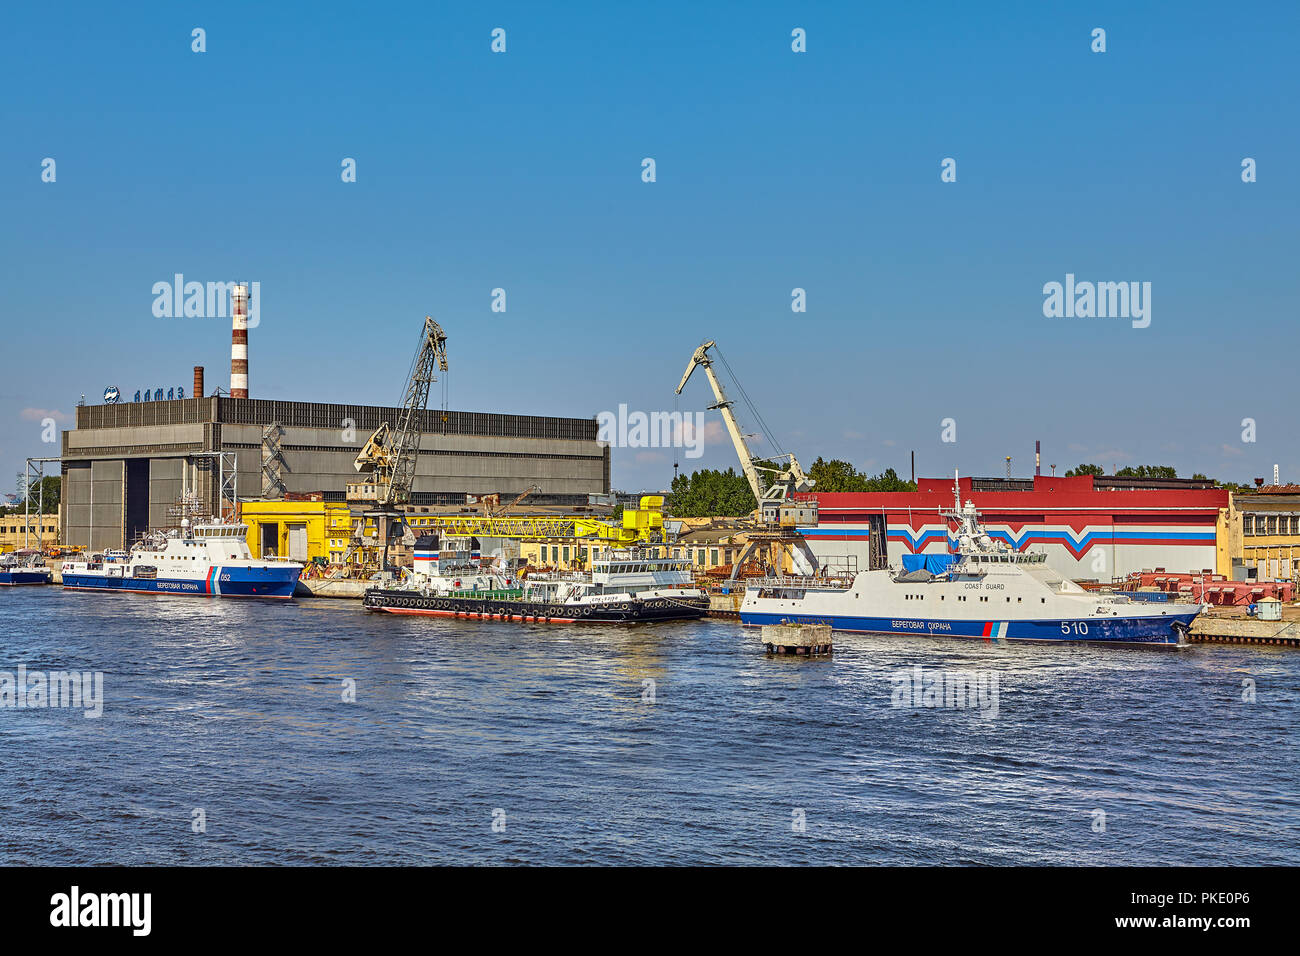 St. Petersburg, Russia - July 19, 2018: Shipyards of an industrial enterprise shipbuilding company Almaz on the banks of the Neva River. Stock Photo